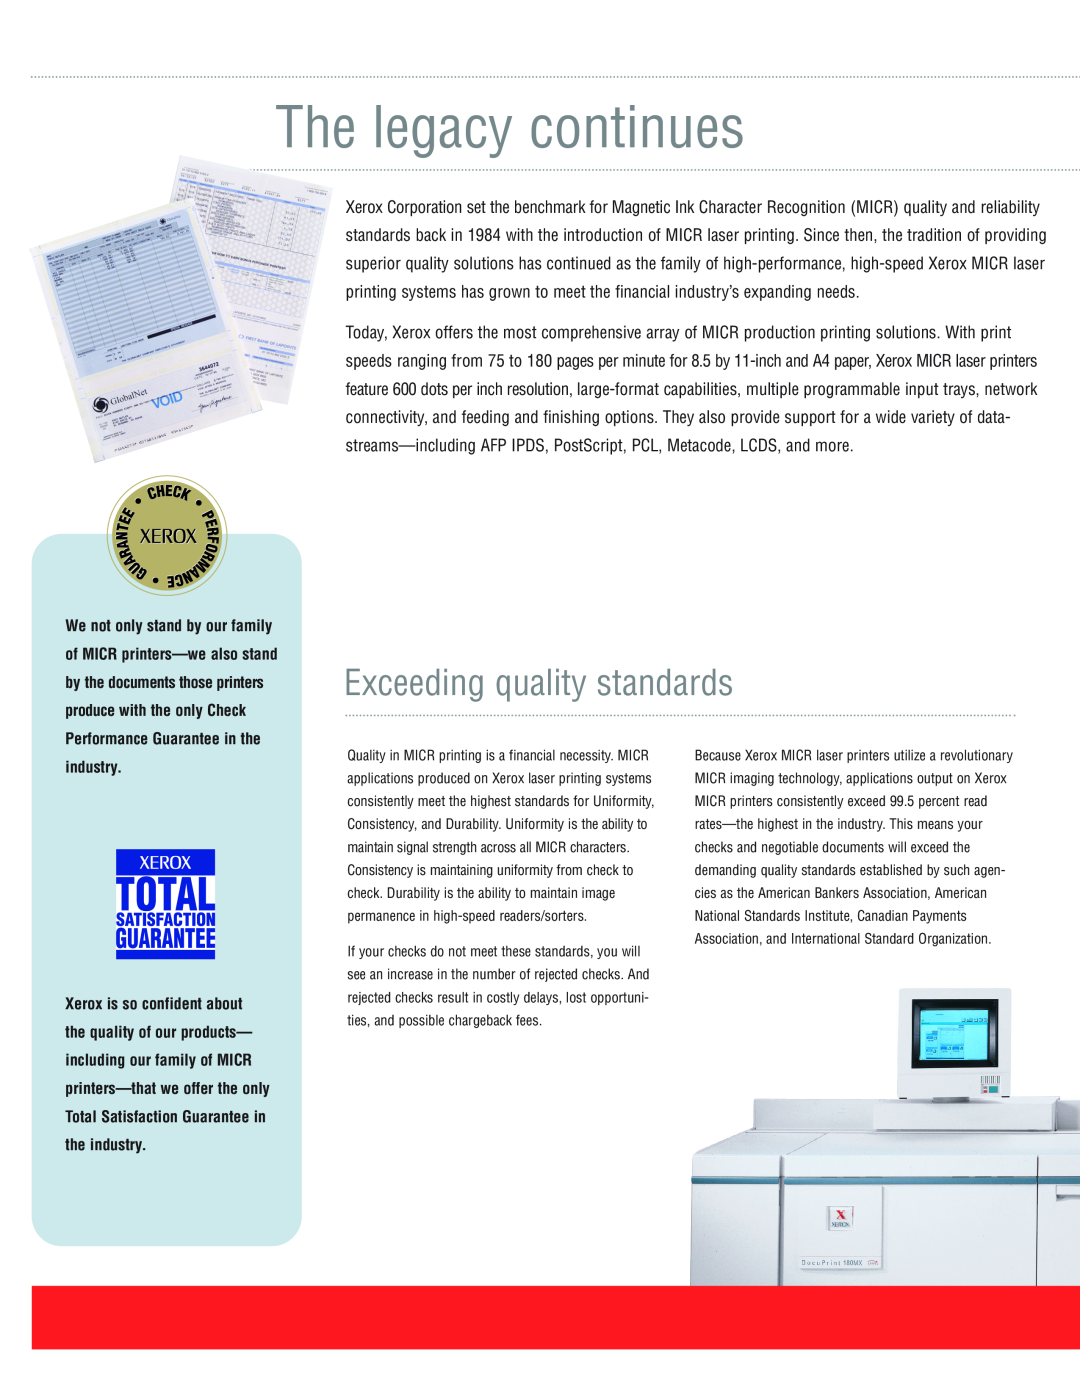 Xerox 2000MX, MICR, 4635MX manual Exceeding quality standards, The legacy continues, industry 